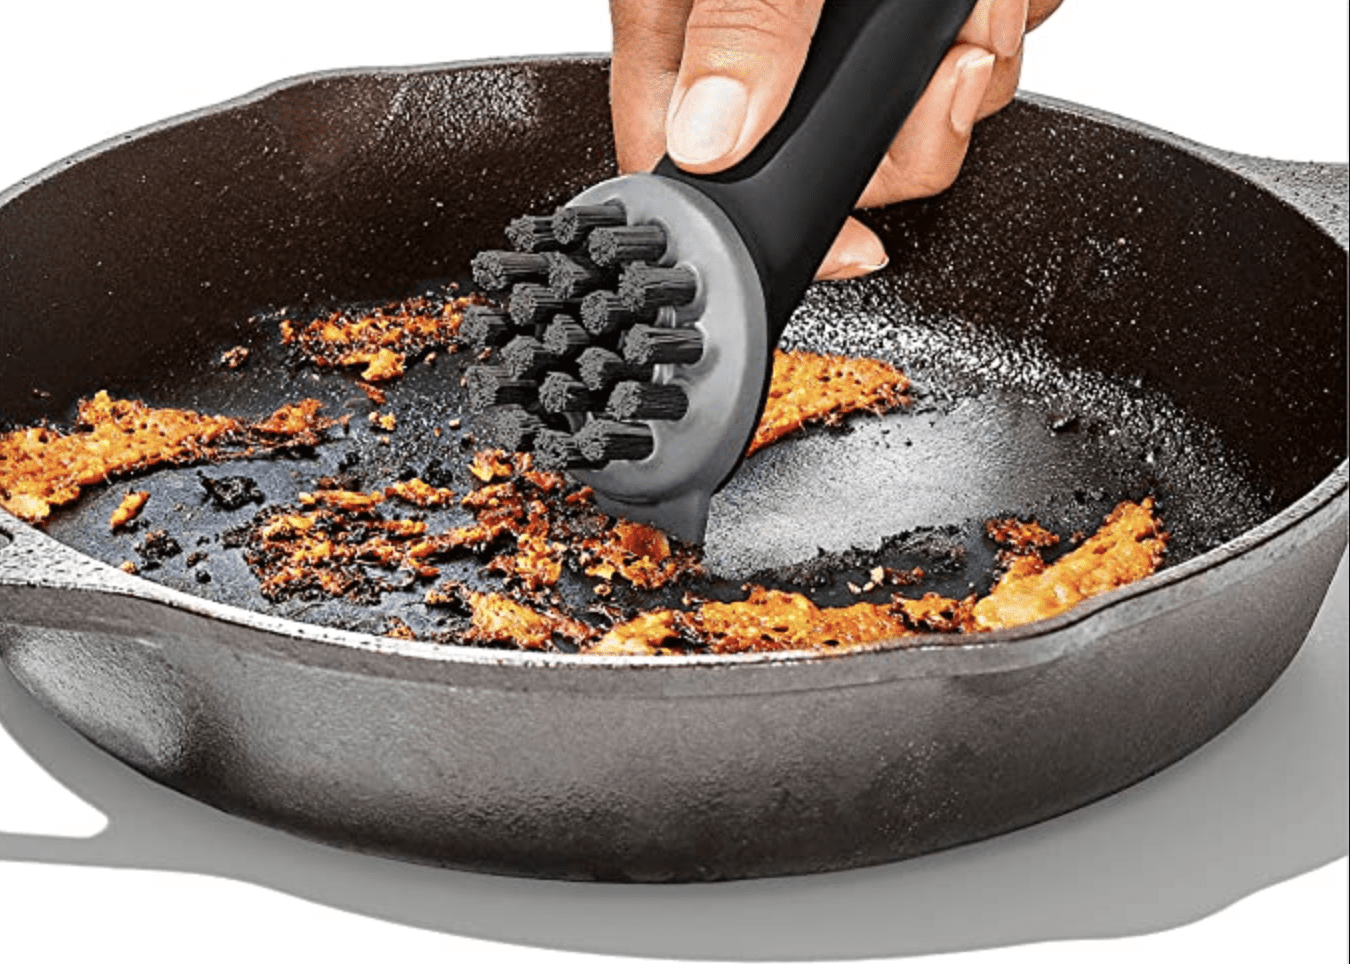 The $12 OXO Find That'll Keep Your Cast Iron Pan Looking Brand